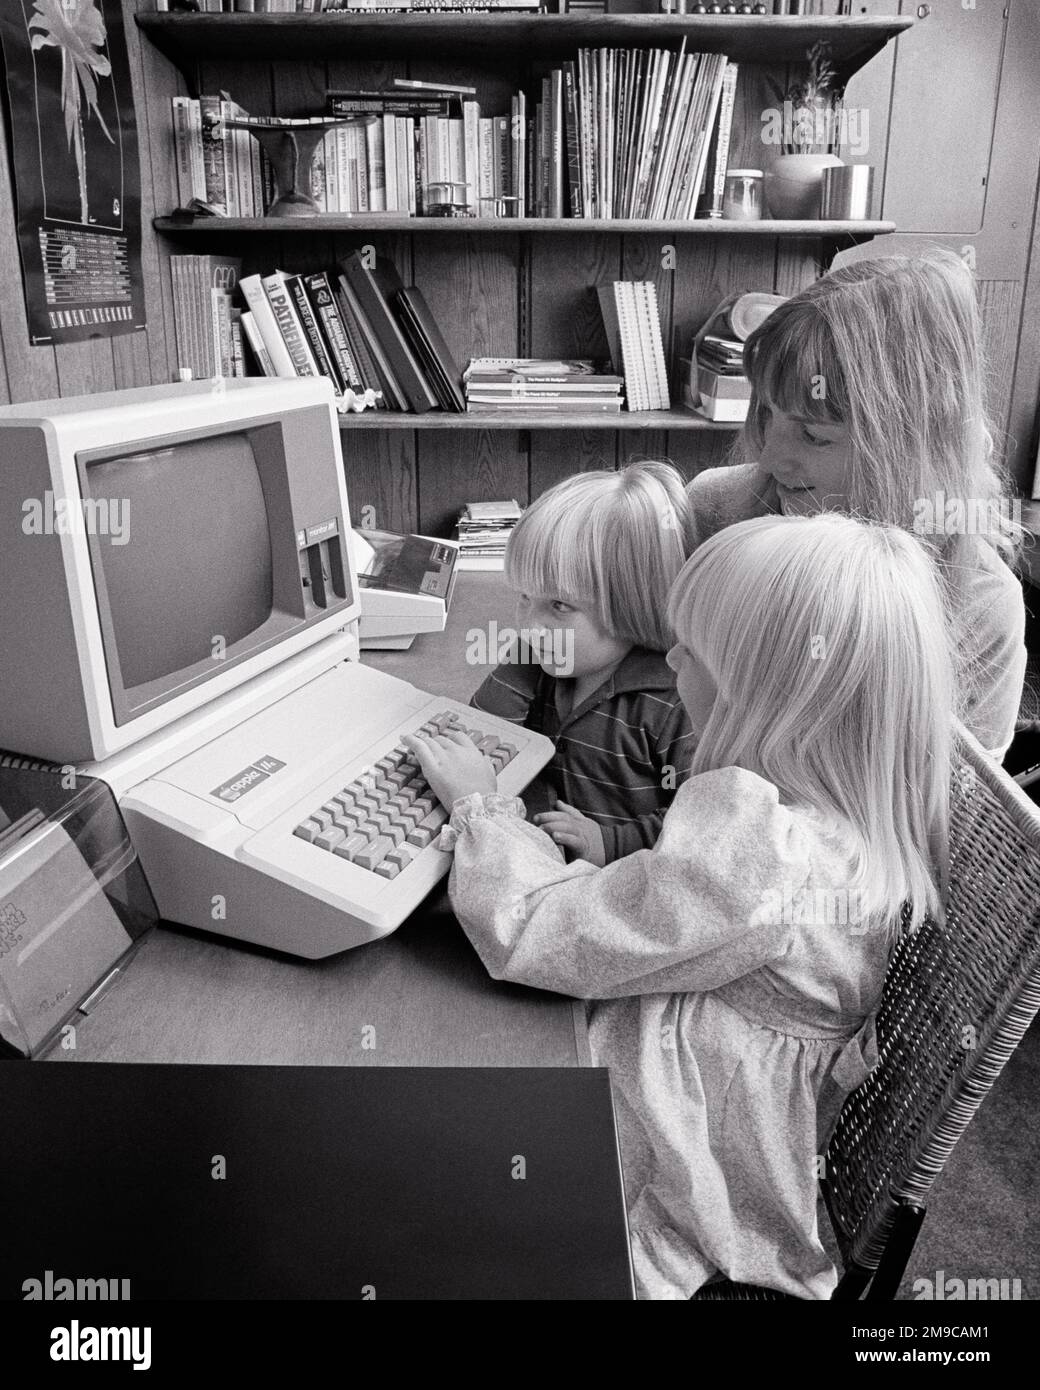 1980s MOTHER AND TWO CHILDREN USING HOME COMPUTER AT WORK STATION  - j14914 HAR001 HARS NOSTALGIA BROTHER OLD FASHION SISTER 1 JUVENILE COMMUNICATION BLOND YOUNG ADULT KEYBOARD TECHNOLOGY INFORMATION MYSTERY FAMILIES LIFESTYLE FEMALES BROTHERS HOME LIFE COPY SPACE LADIES COMPUTERS DAUGHTERS PERSONS MALES SIBLINGS SISTERS B&W HEAD AND SHOULDERS HIGH ANGLE DISCOVERY AND EXCITEMENT KNOWLEDGE PROGRESS INNOVATION OPPORTUNITY OCCUPATIONS SIBLING USING CONNECTION MONITOR HOME OFFICE COOPERATION JUVENILES MOMS TOGETHERNESS YOUNG ADULT WOMAN BLACK AND WHITE CAUCASIAN ETHNICITY COMPUTING HAR001 Stock Photo